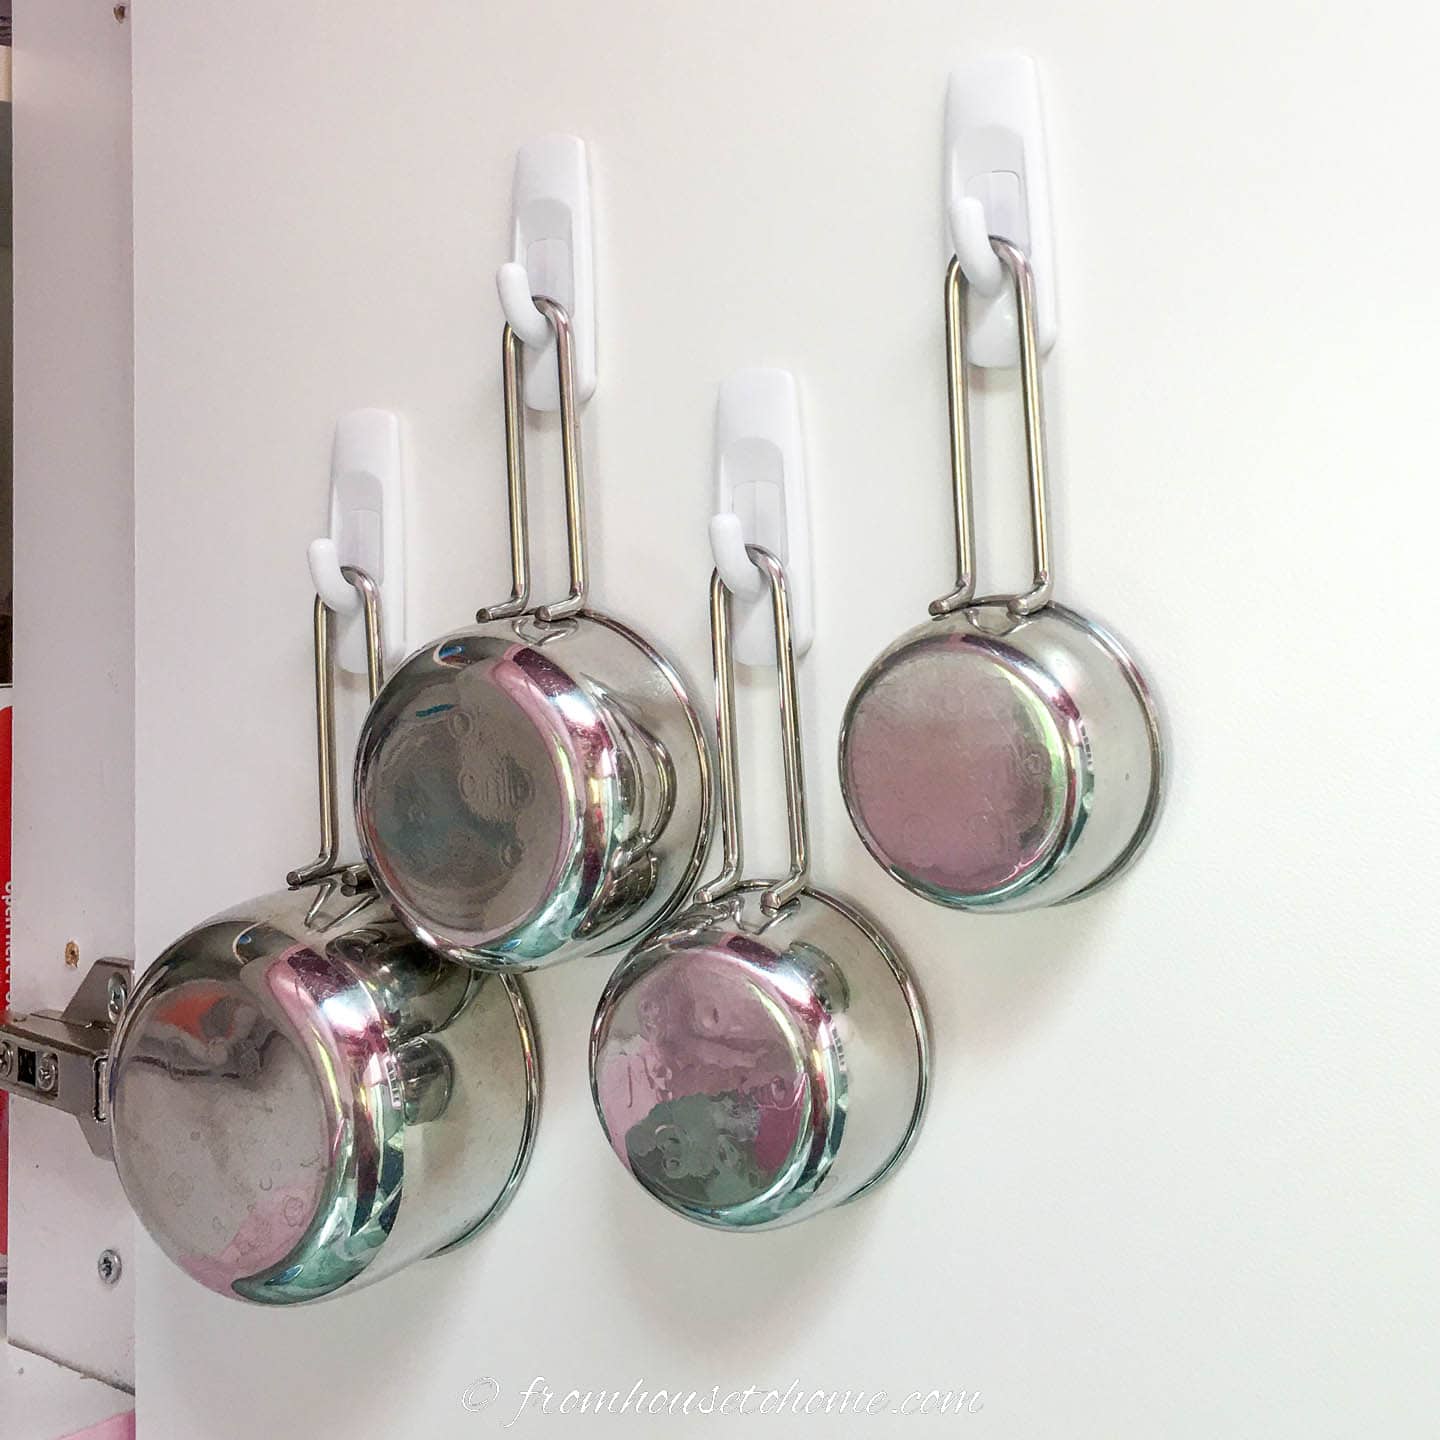 Measuring cups hung on the inside of a kitchen cabinet door with Command hooks